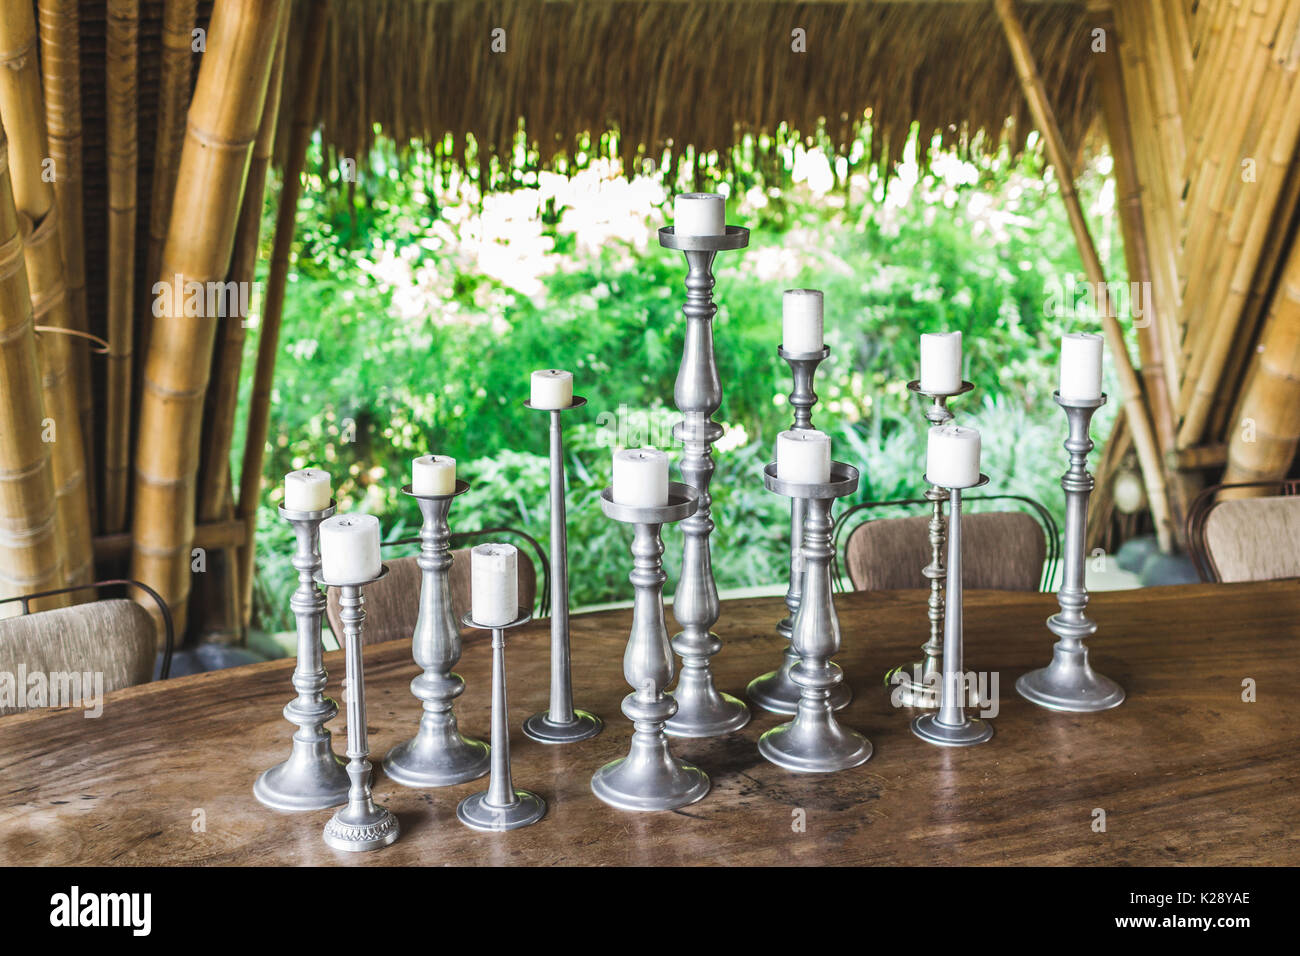 Many white candles in vintage metal candlesticks on wooden table as decoration of restaurant outdoor in garden Stock Photo